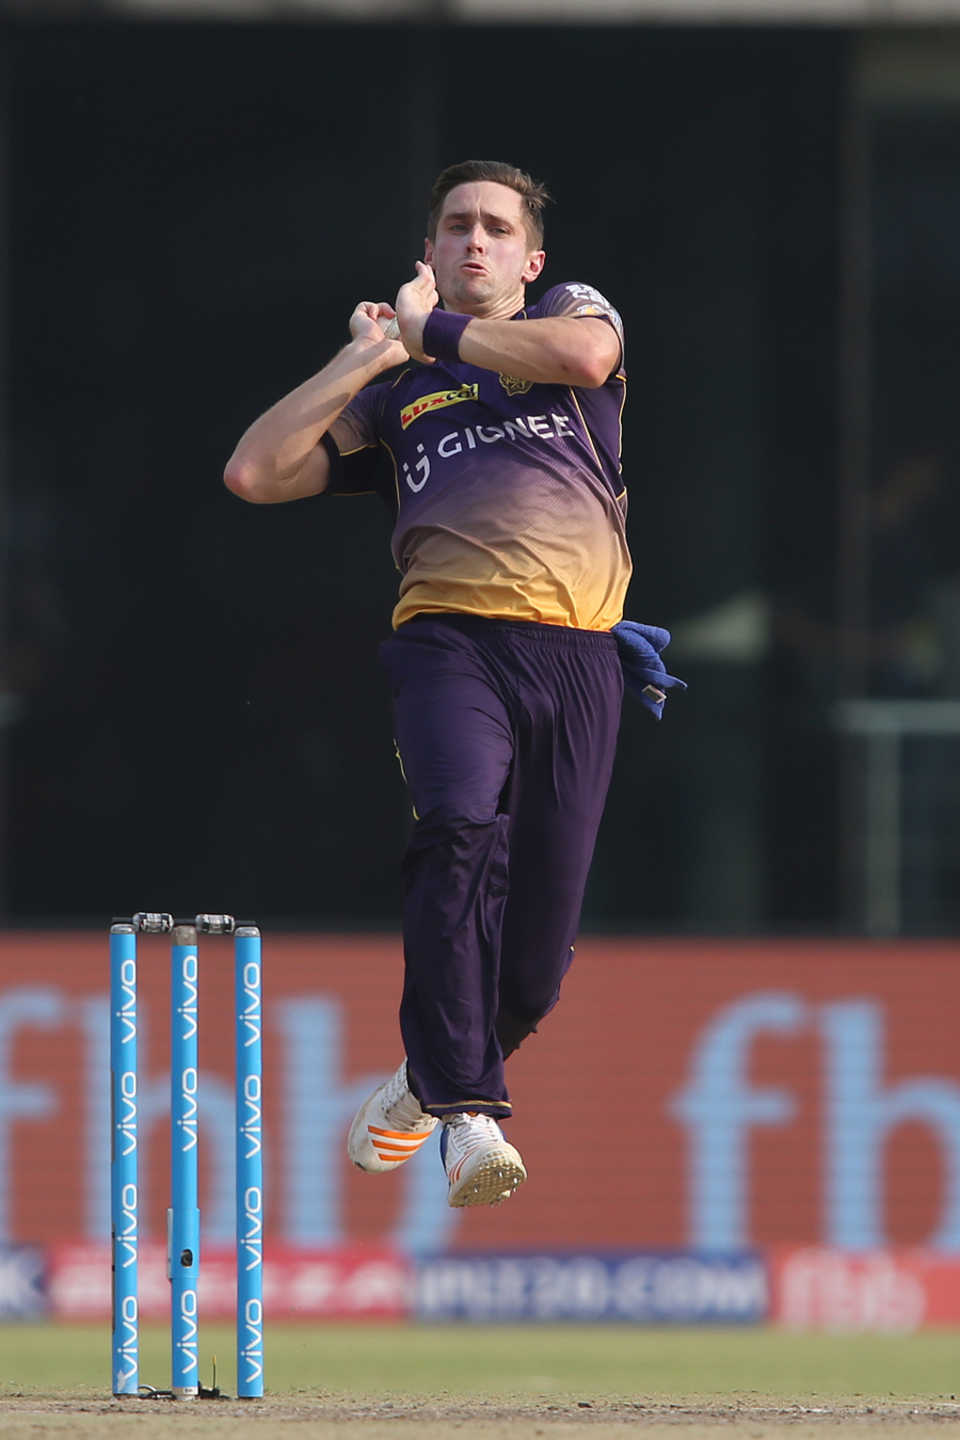 Chris Woakes in his delivery stride